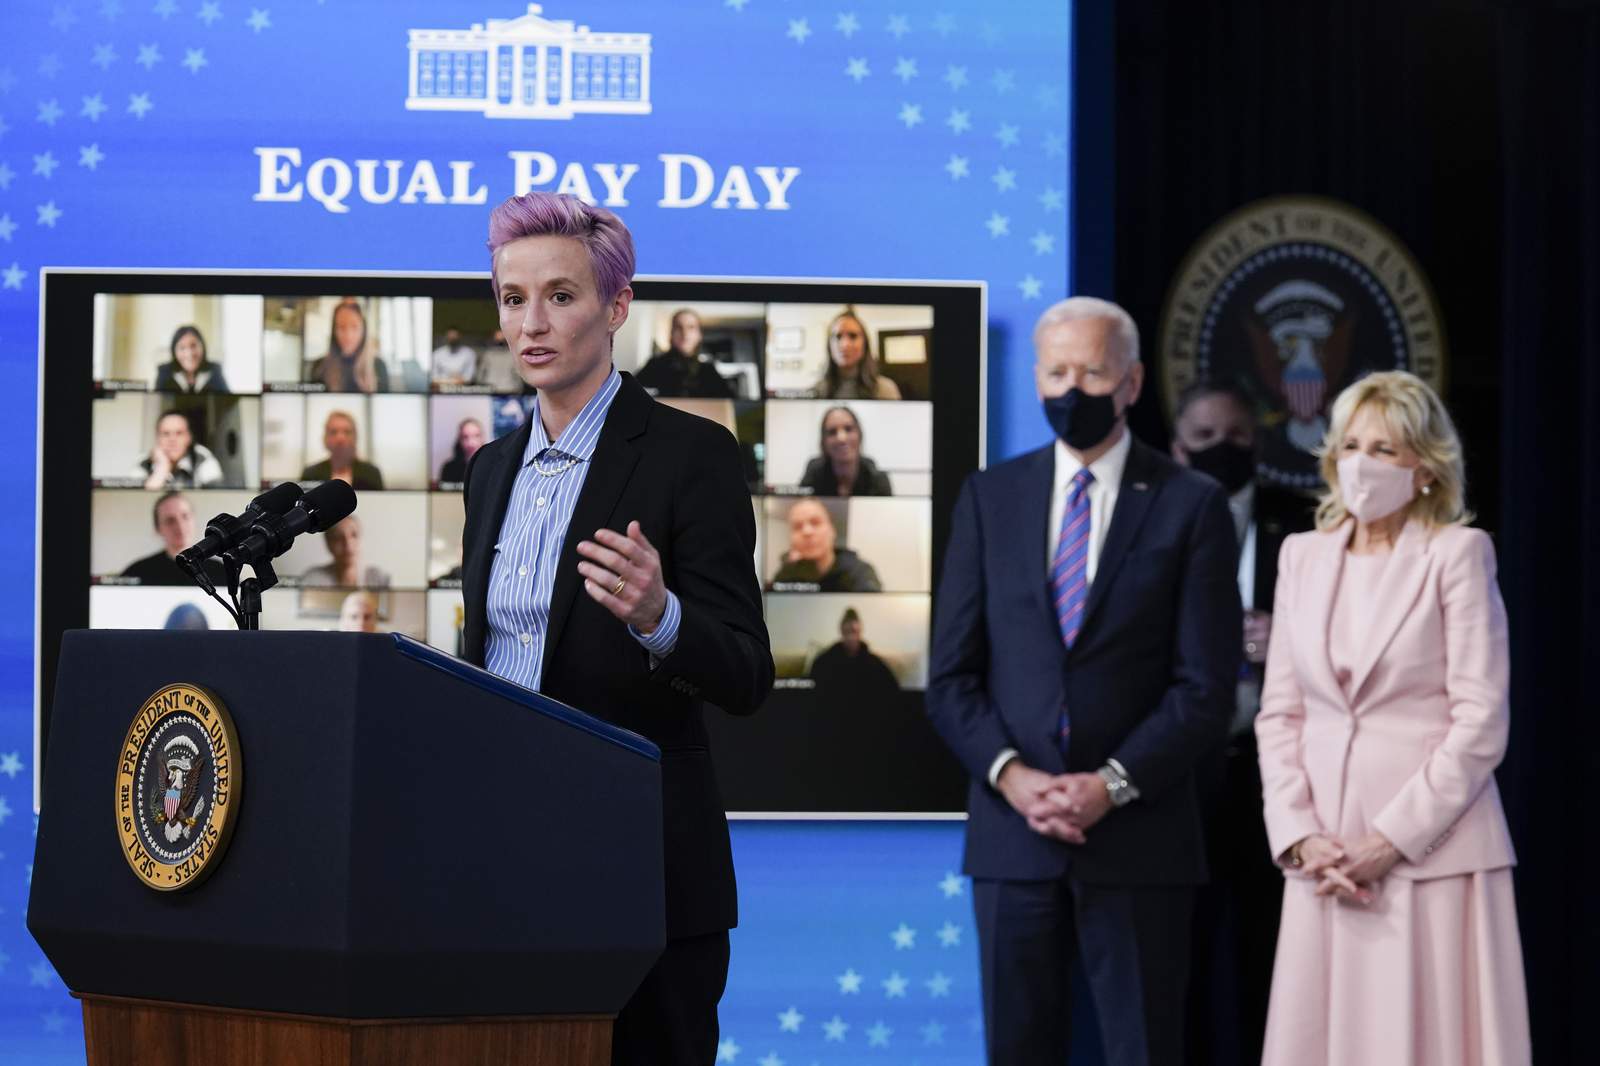 Women’s soccer stars join Biden to promote closing pay gap